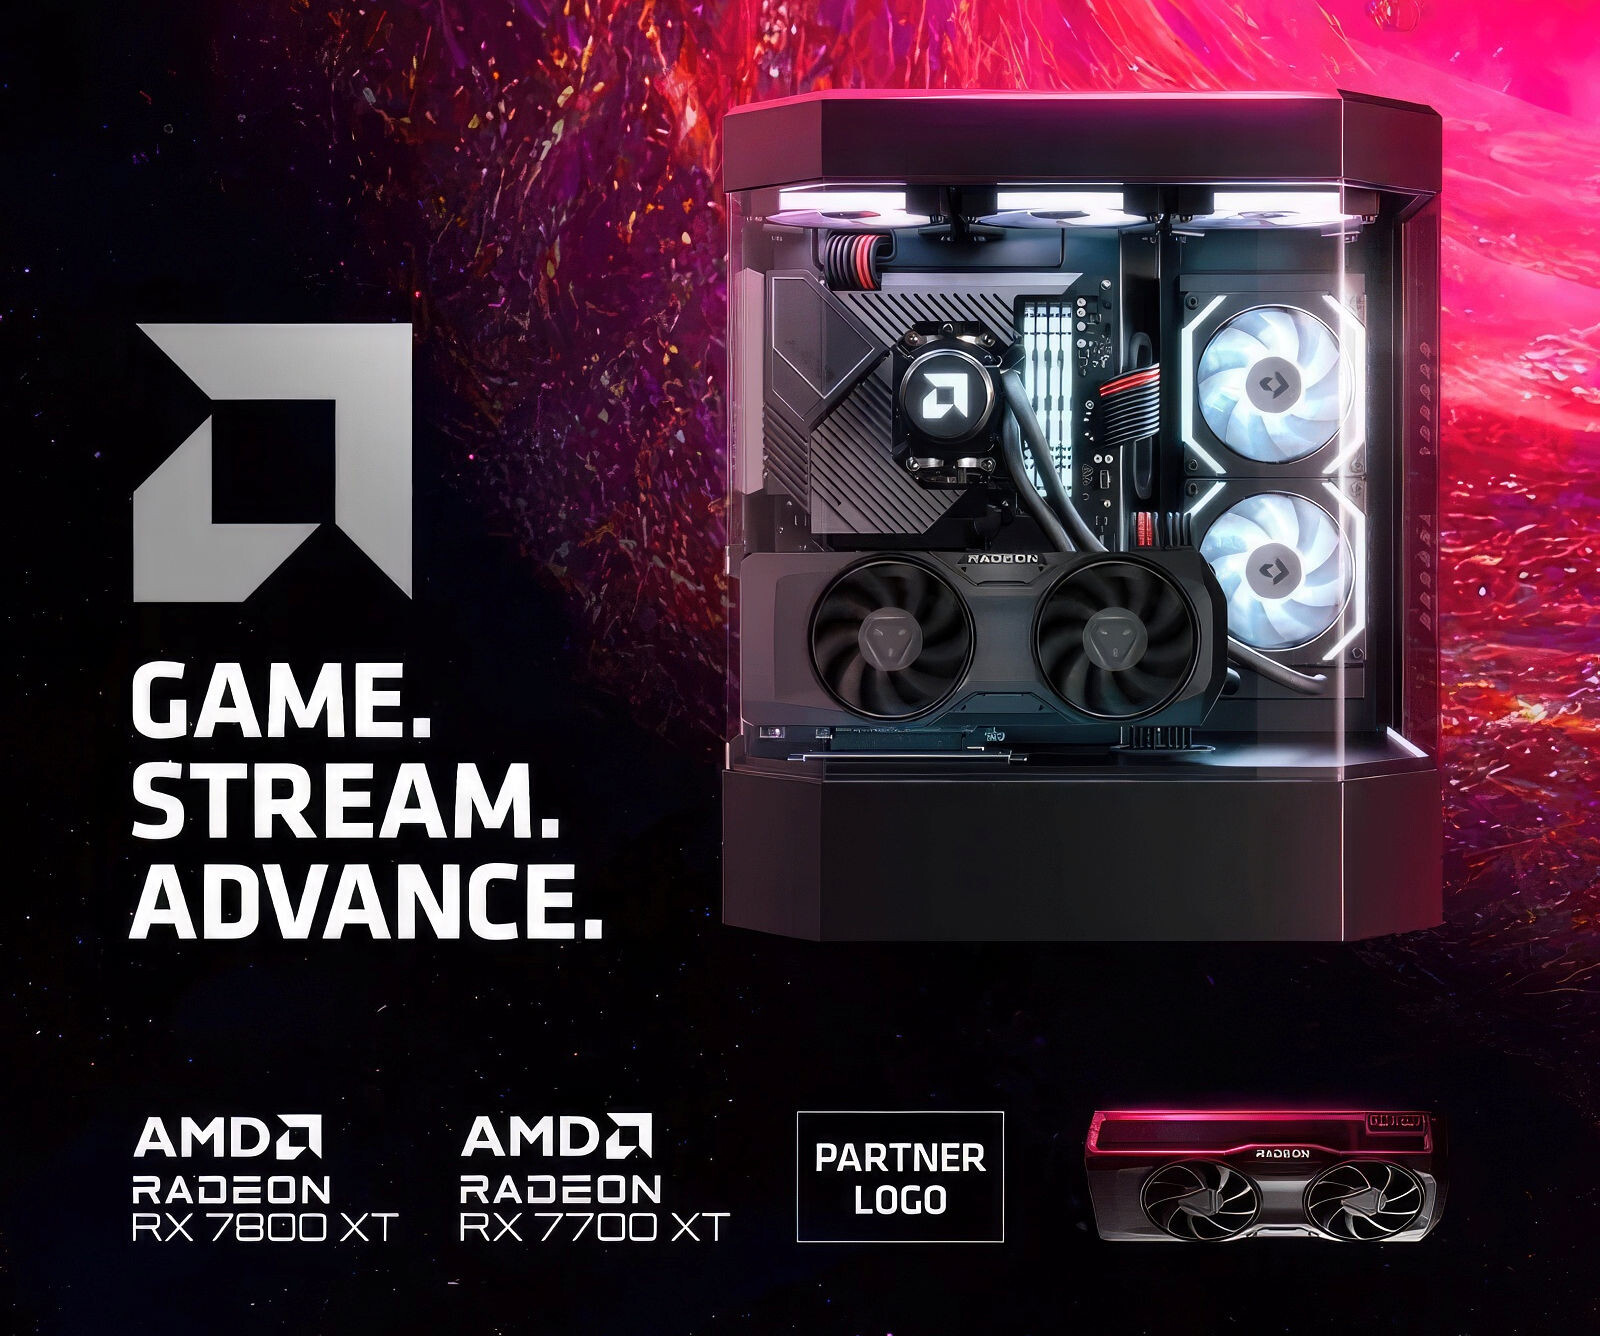 AMD Radeon RX 7800 XT and RX 7700 XT Reference Design Pictured